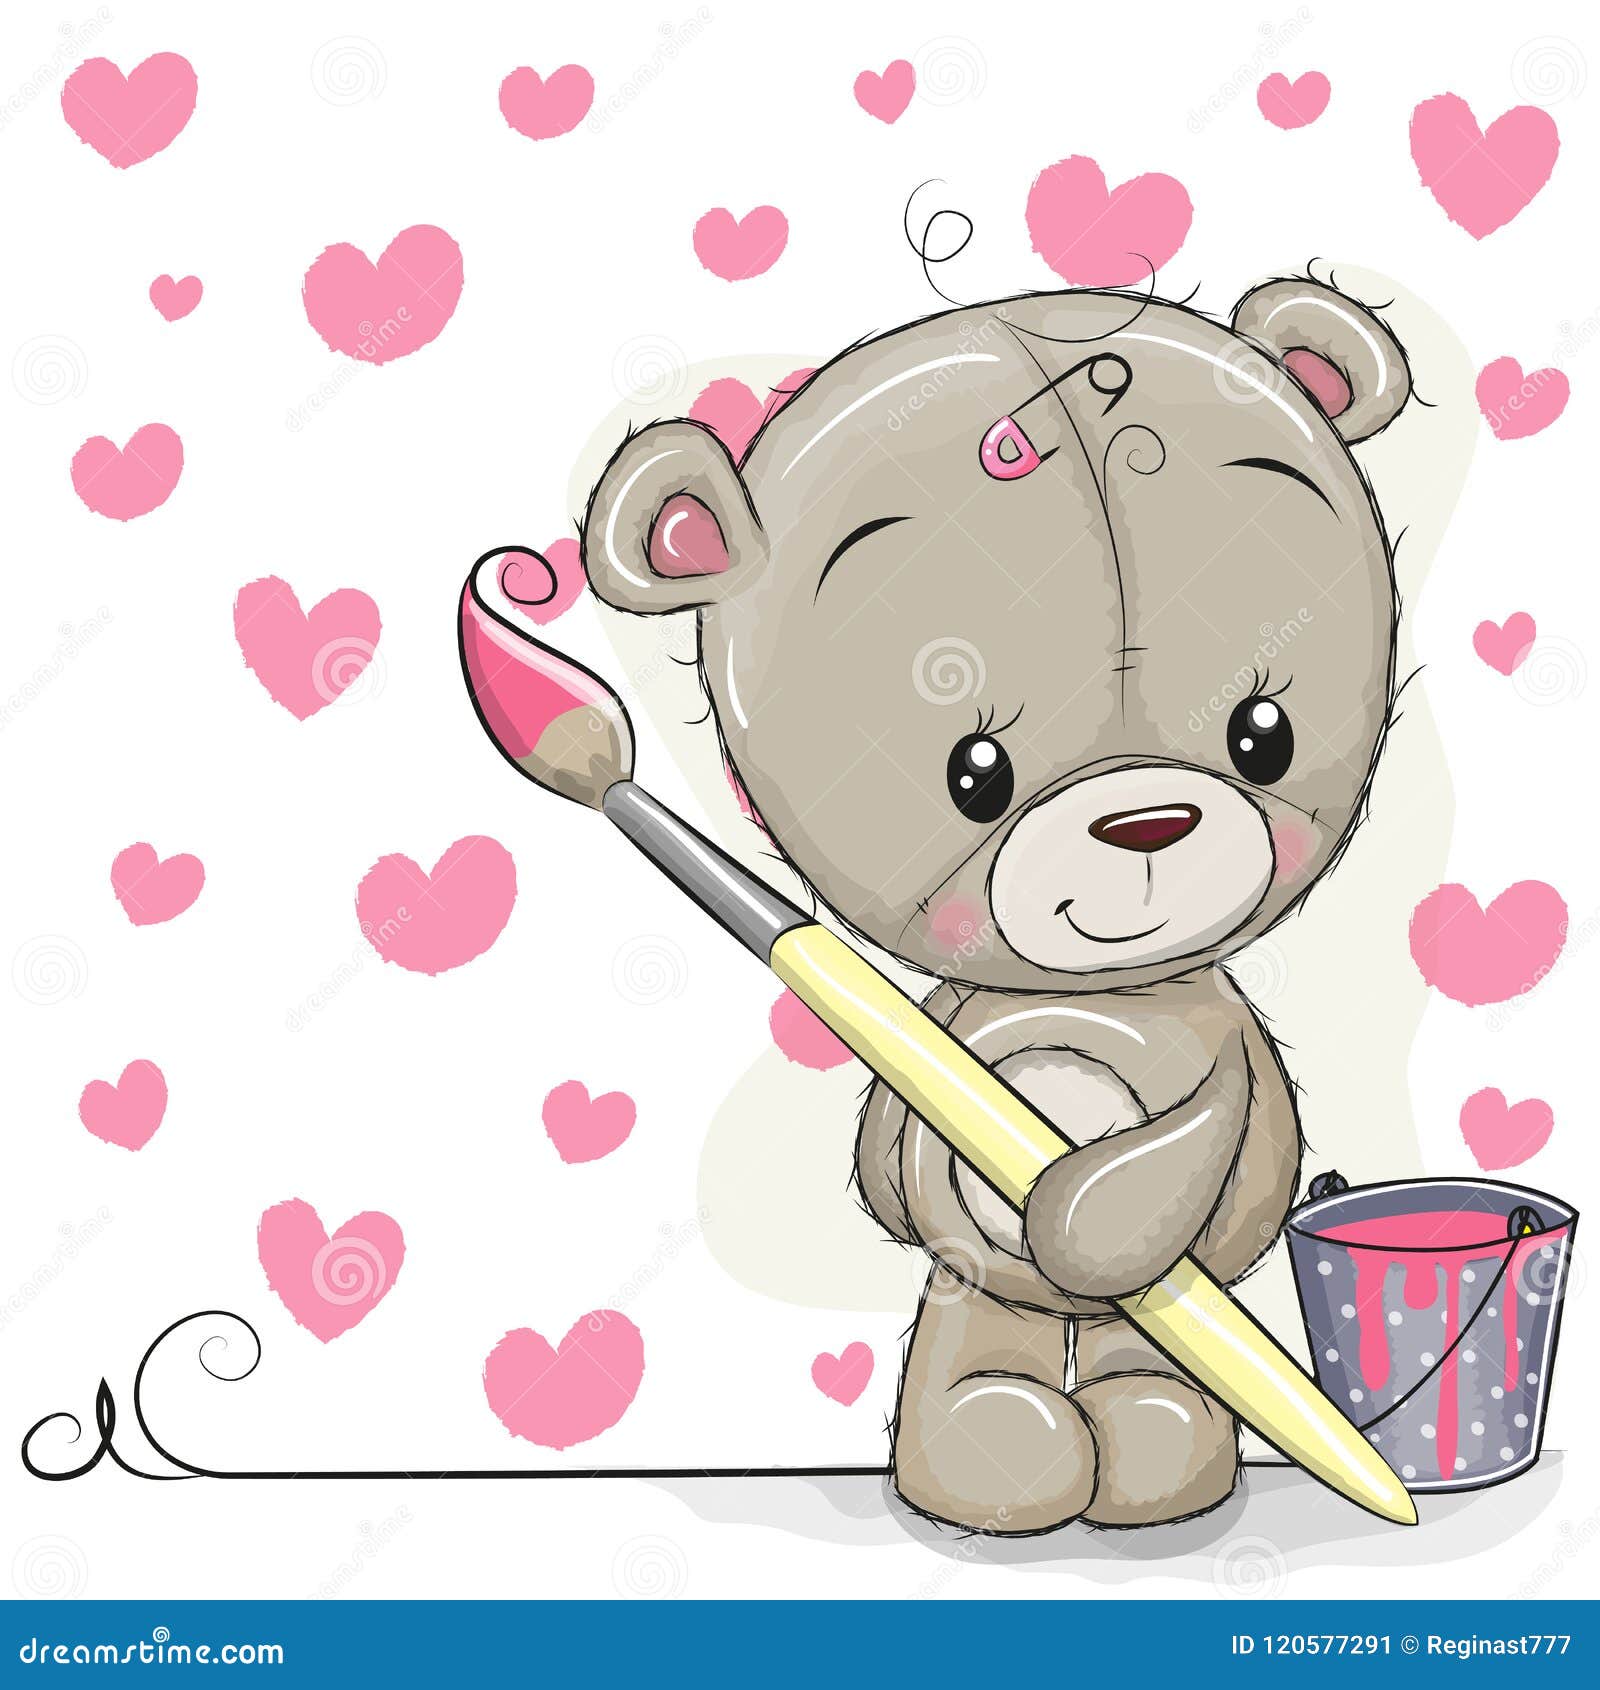 Aggregate more than 167 teddy bear drawing with heart super hot